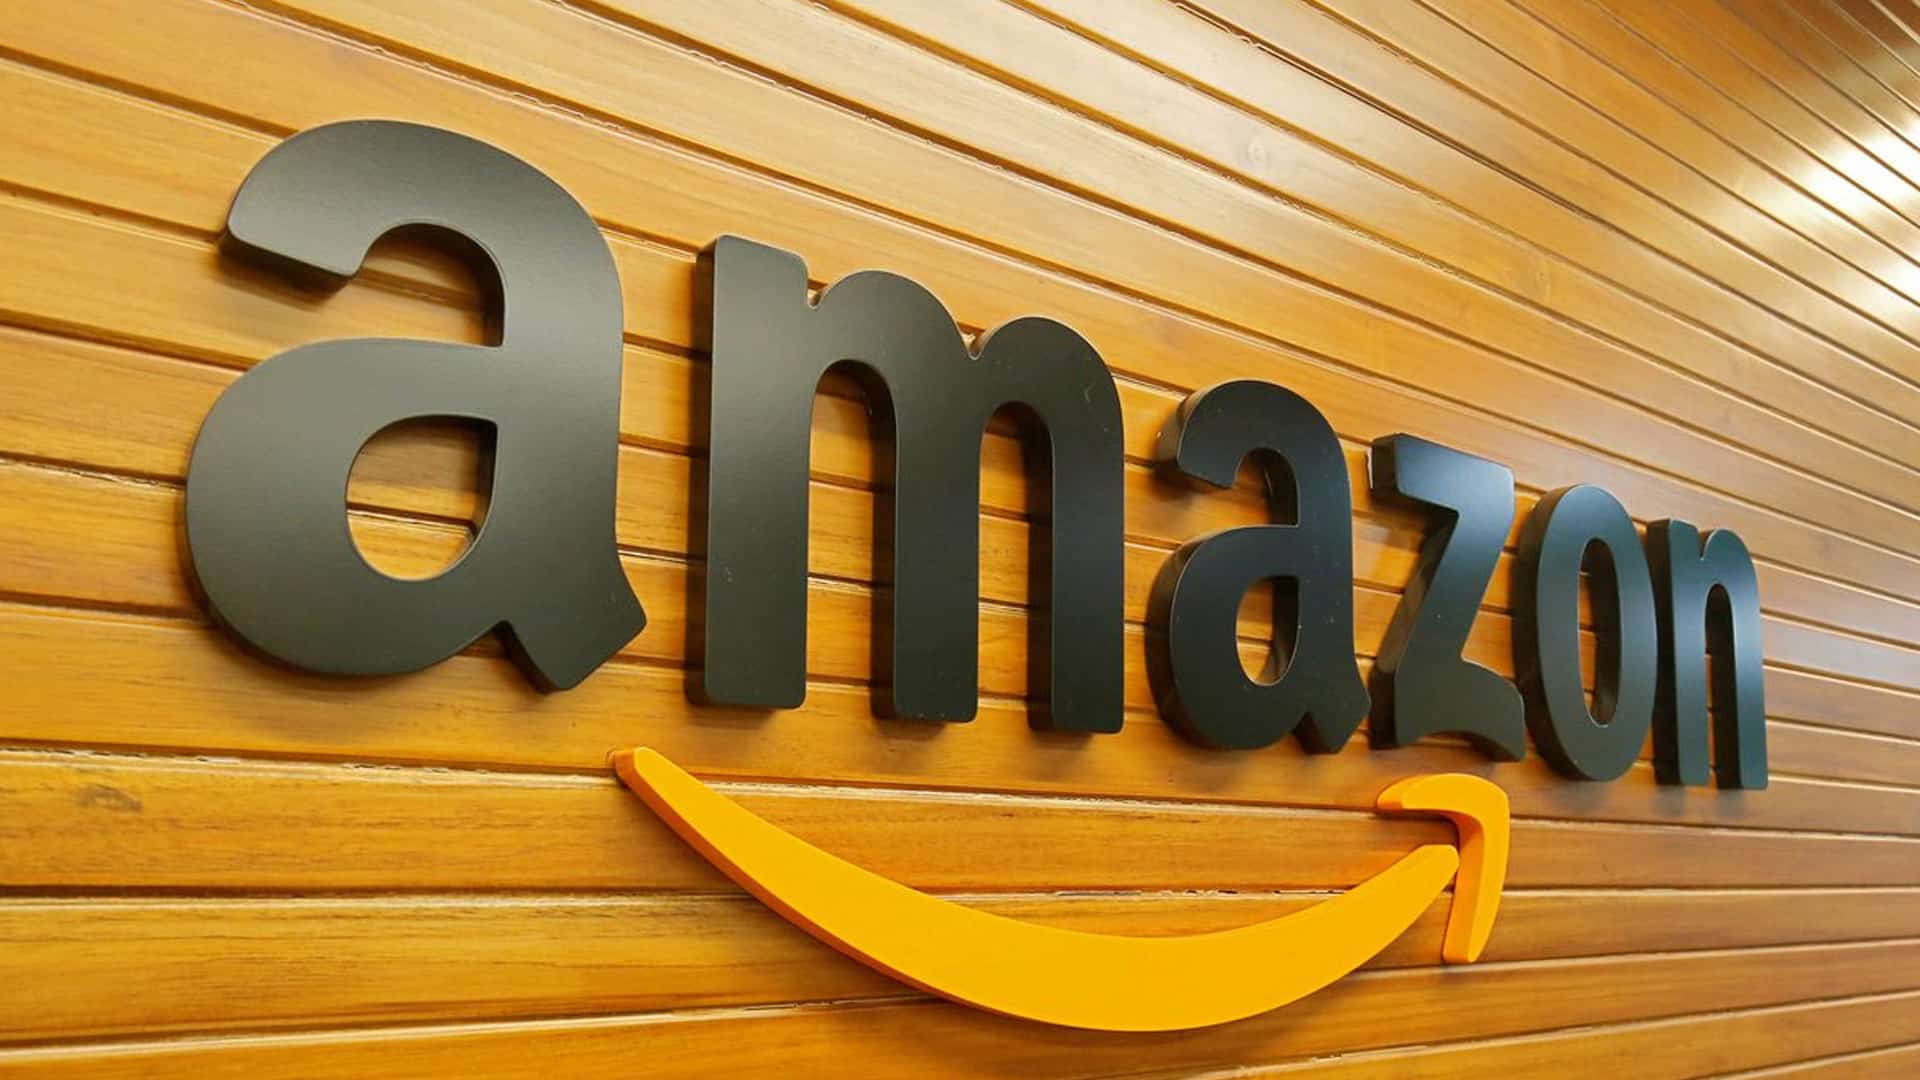 Amazon Introduces Simplified Registration Process Making It Easy for Indian Sellers to Start Selling Online